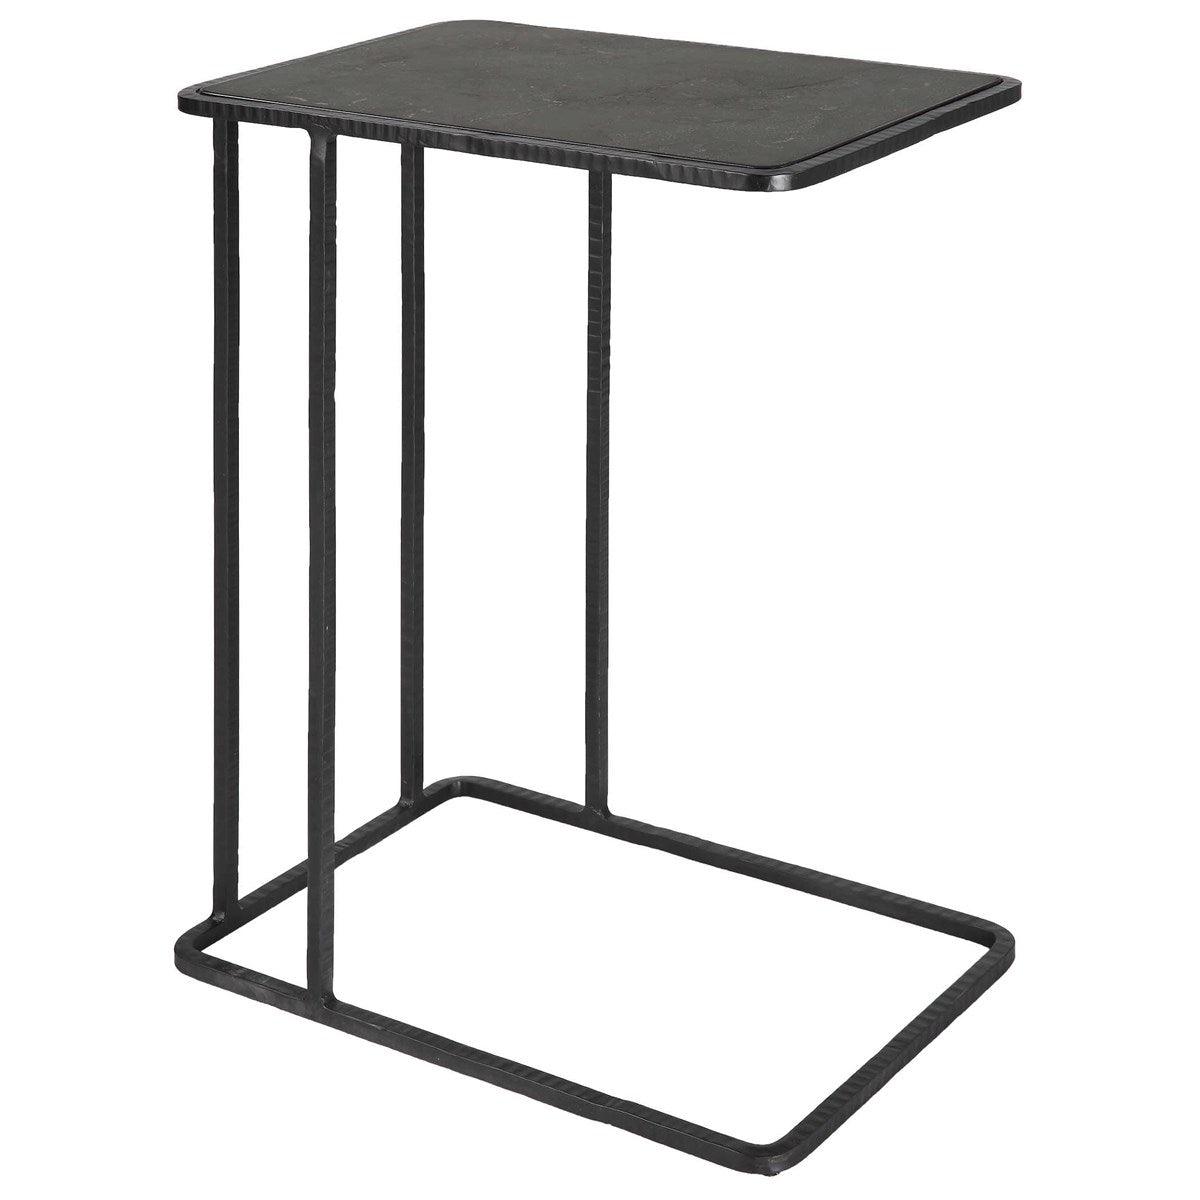 The Uttermost - Cavern Accent Table - 22905 | Montreal Lighting & Hardware